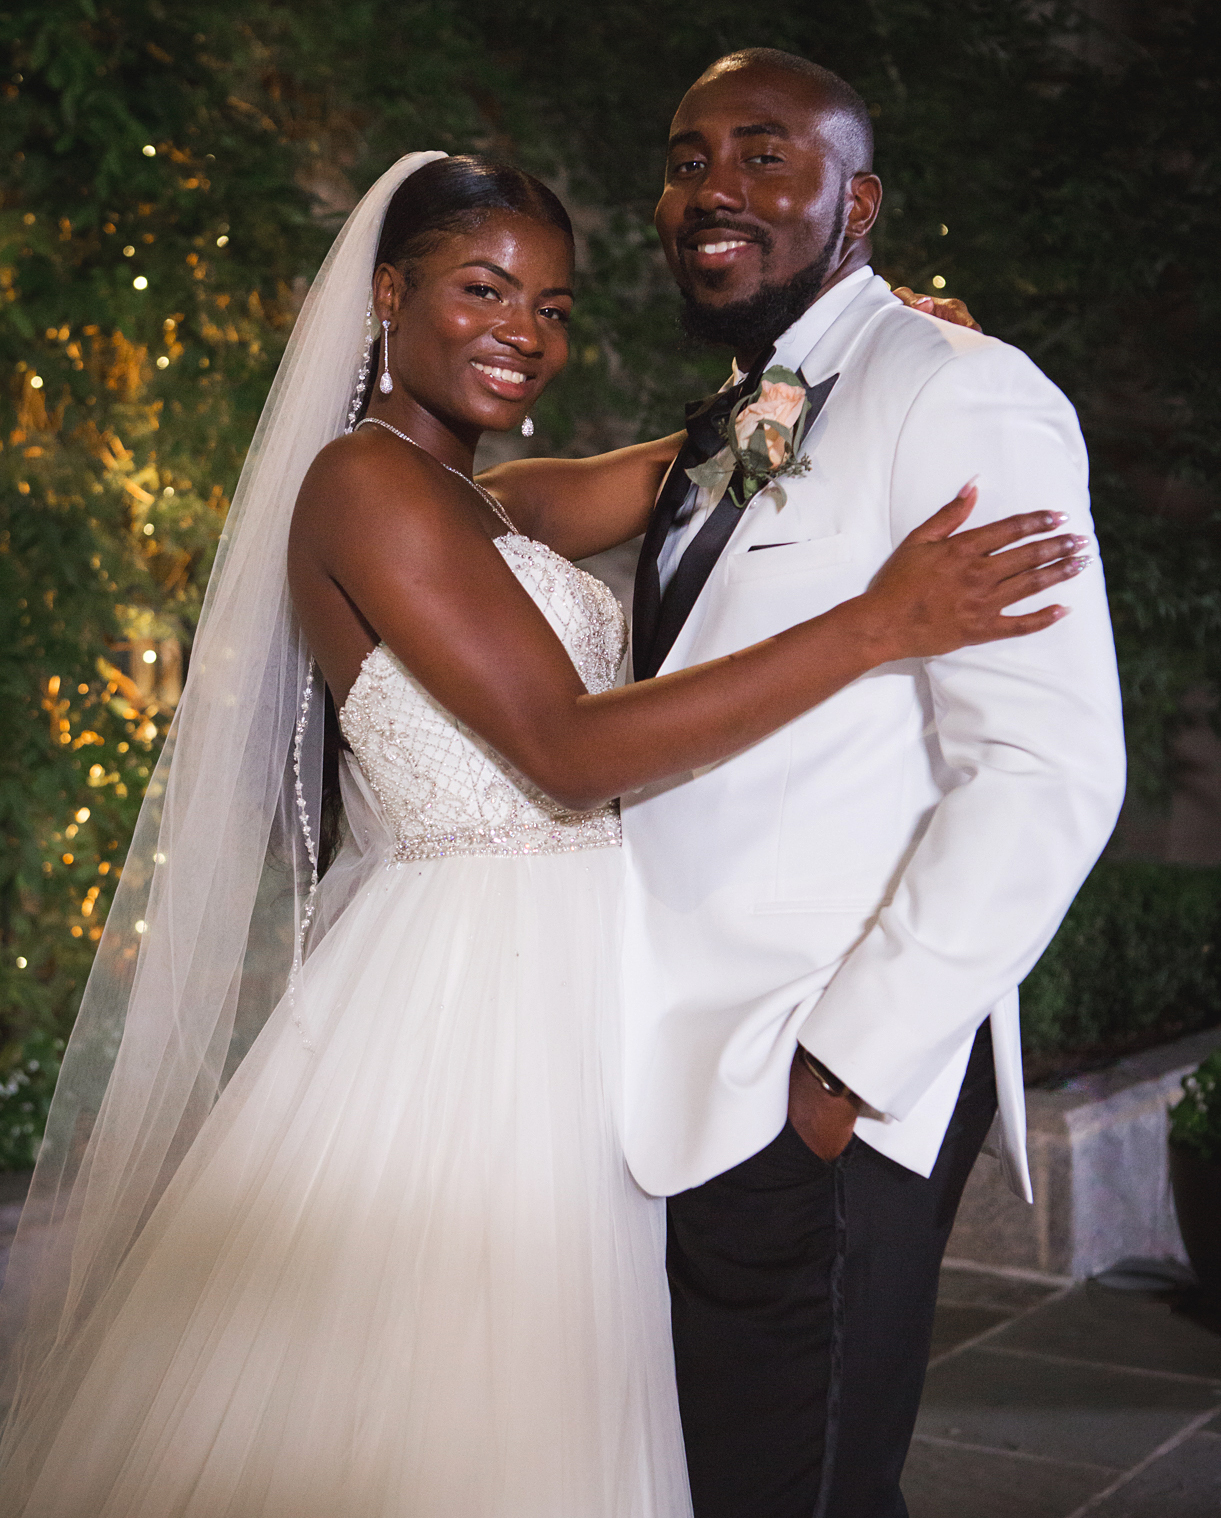 Meet The 'Married At First Sight' Season 10 Cast Of 5 New Couples